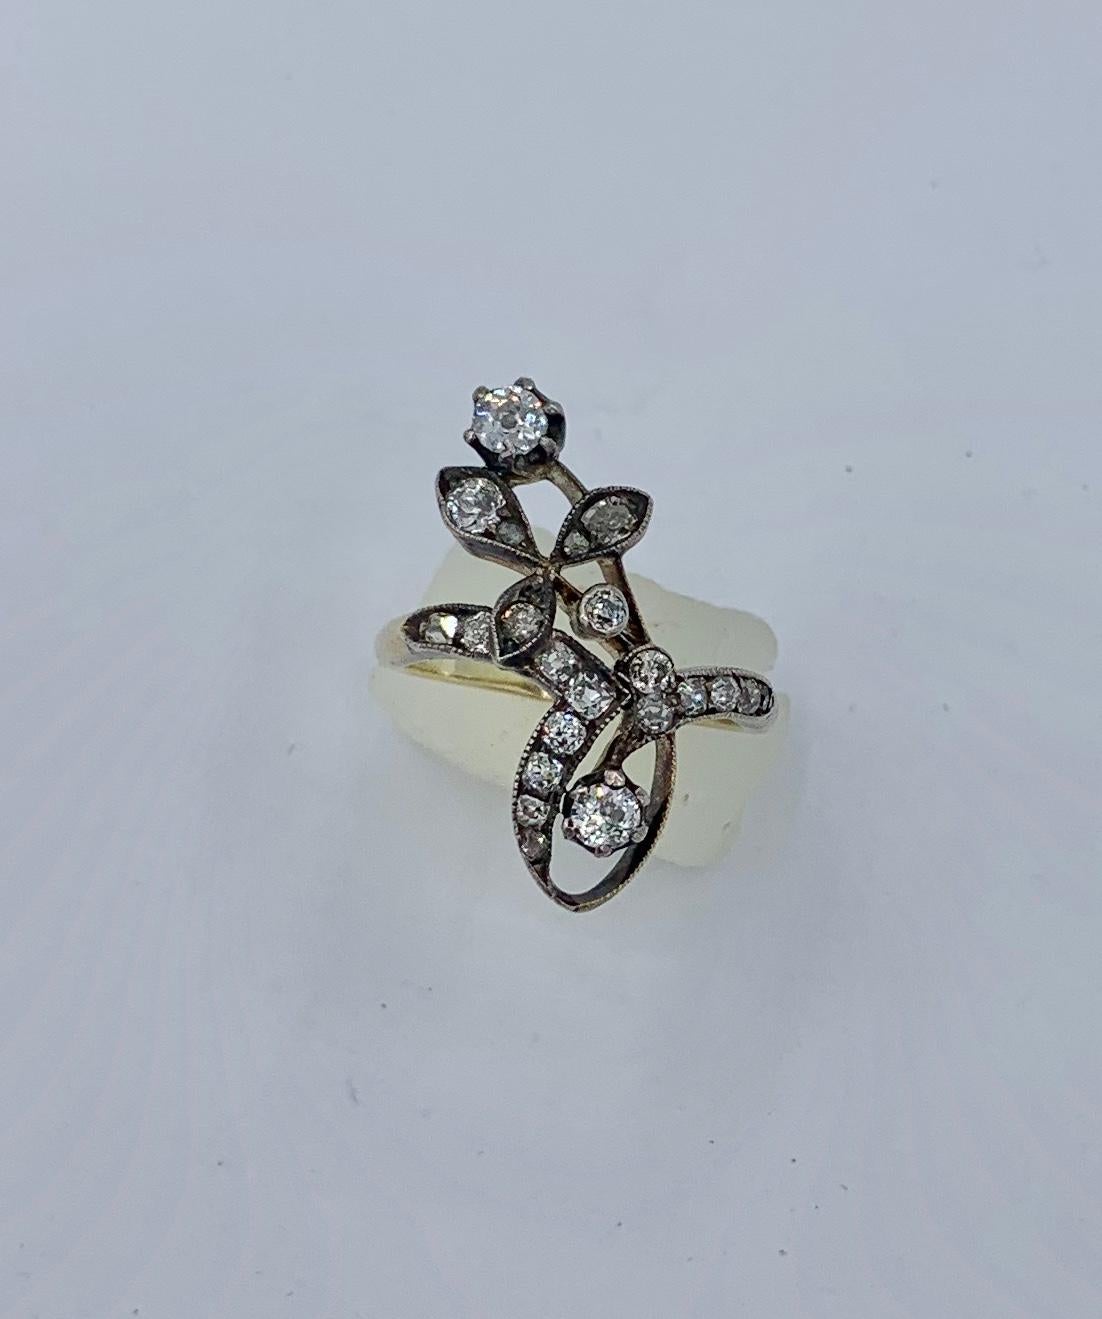 Russian Art Nouveau Old Mine Cut Diamond Flower Ring 14 Karat Gold Engagement In Good Condition For Sale In New York, NY